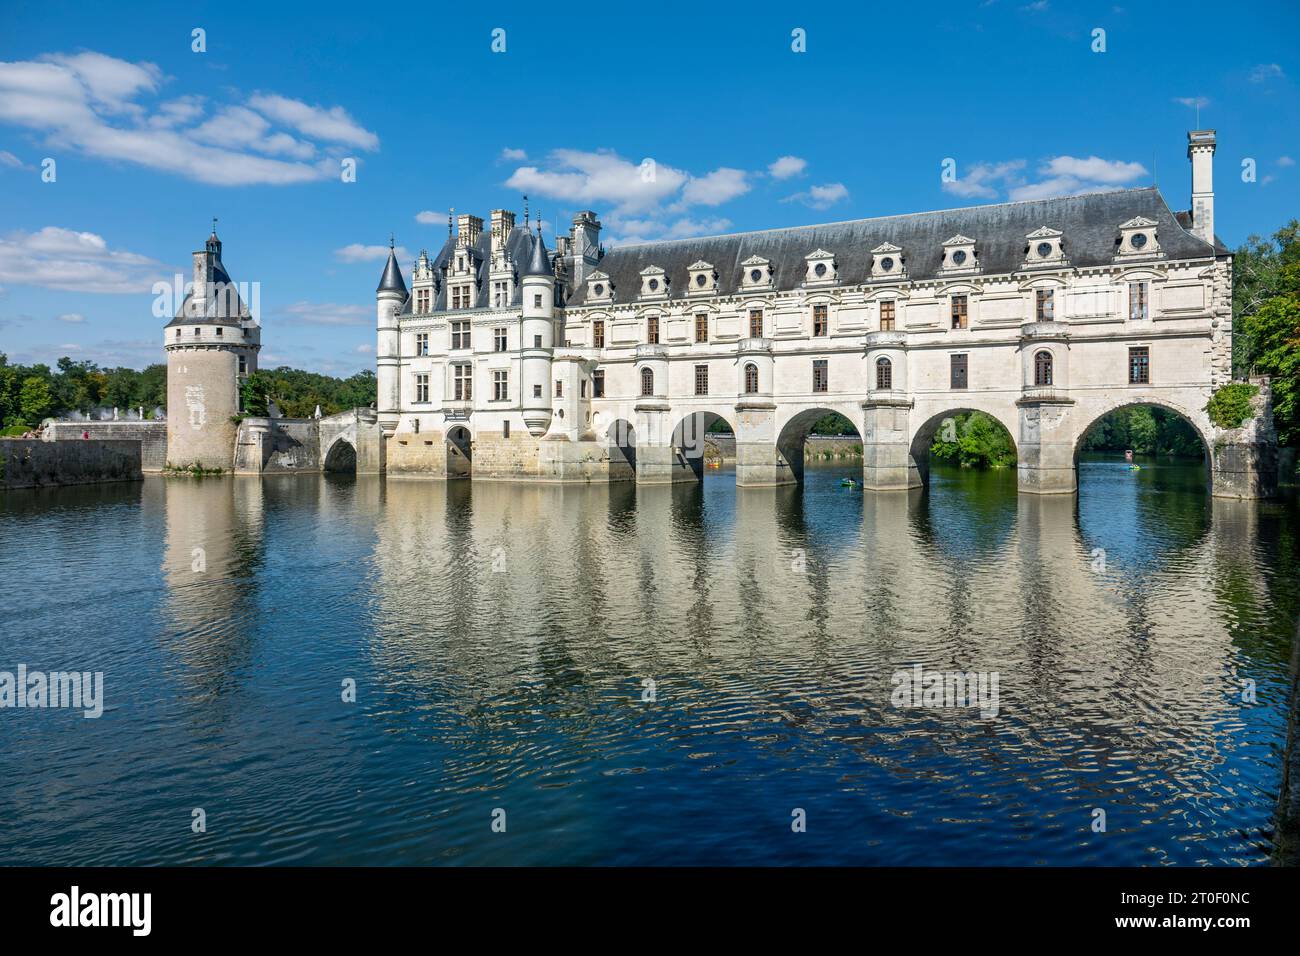 Chenonceau Castle is a moated castle. Its main building has stood on the northern bank of the Cher since 1522, while the gallery, not completed until 1576, spans the river. Although Chenonceau stands on the Cher River, it is counted among the Loire castles. Stock Photo